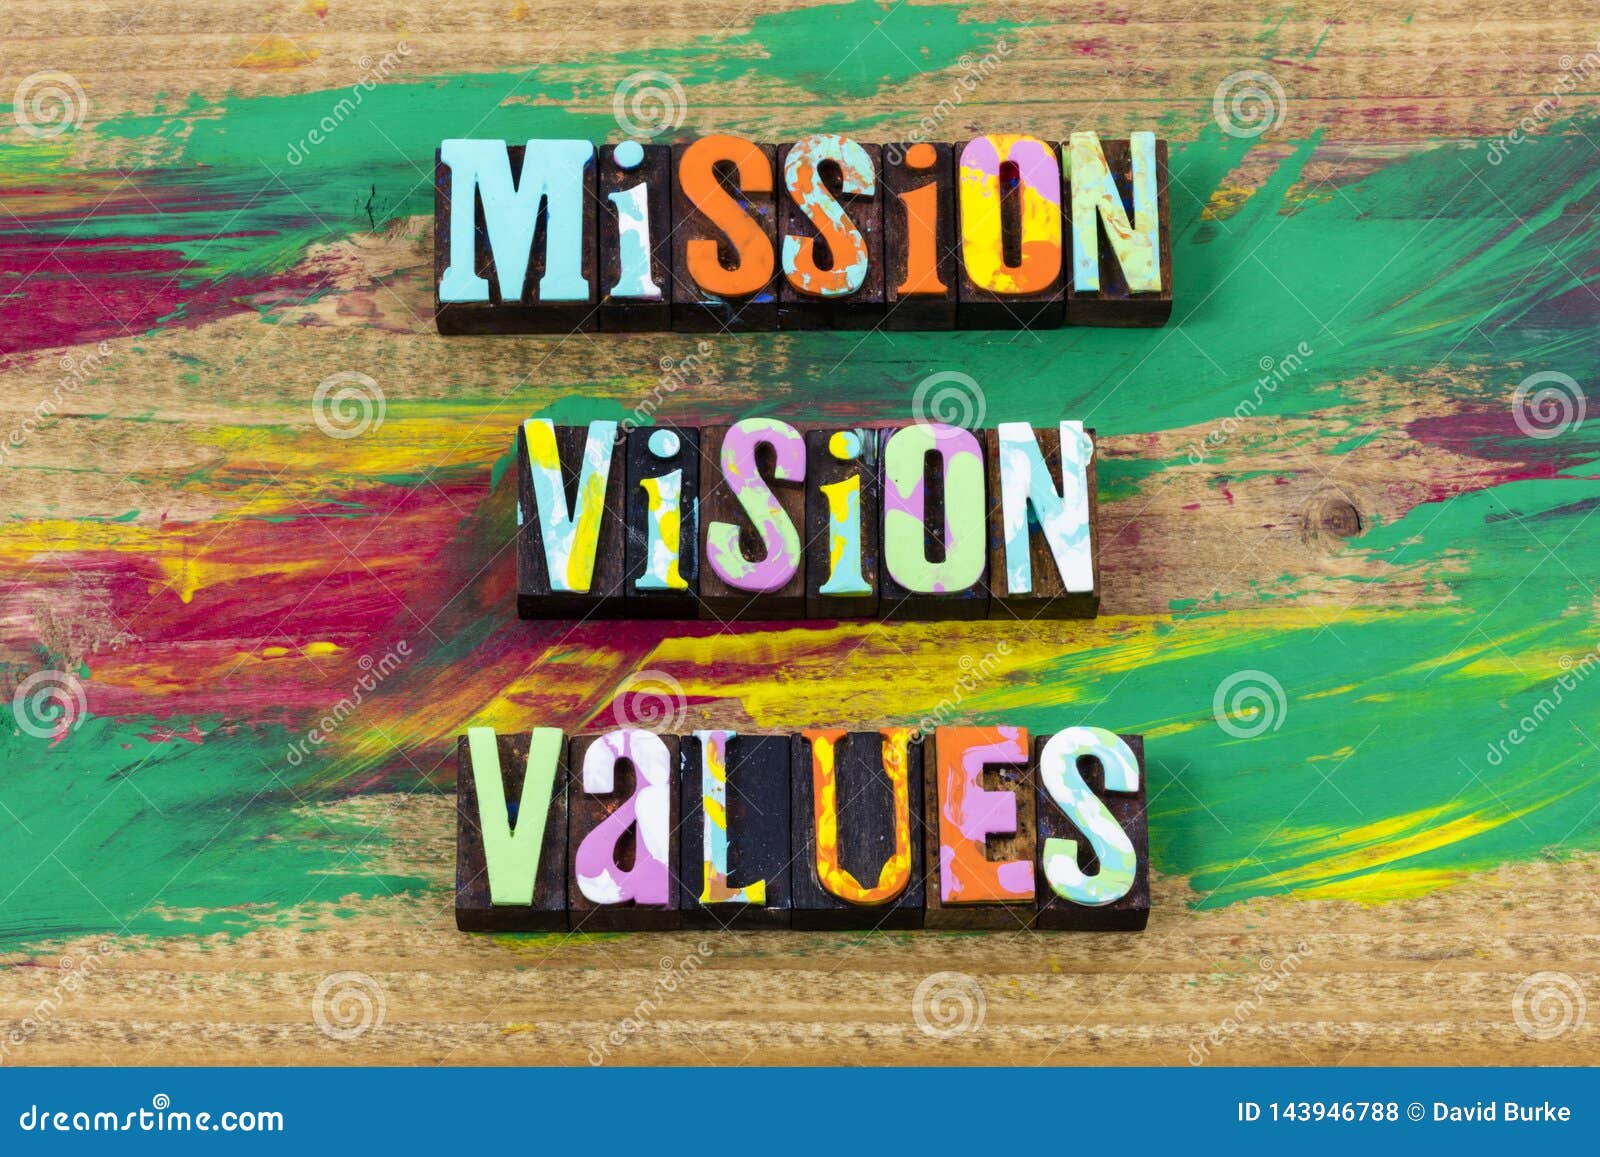 mission vision values purpose believe business integrity trust planning